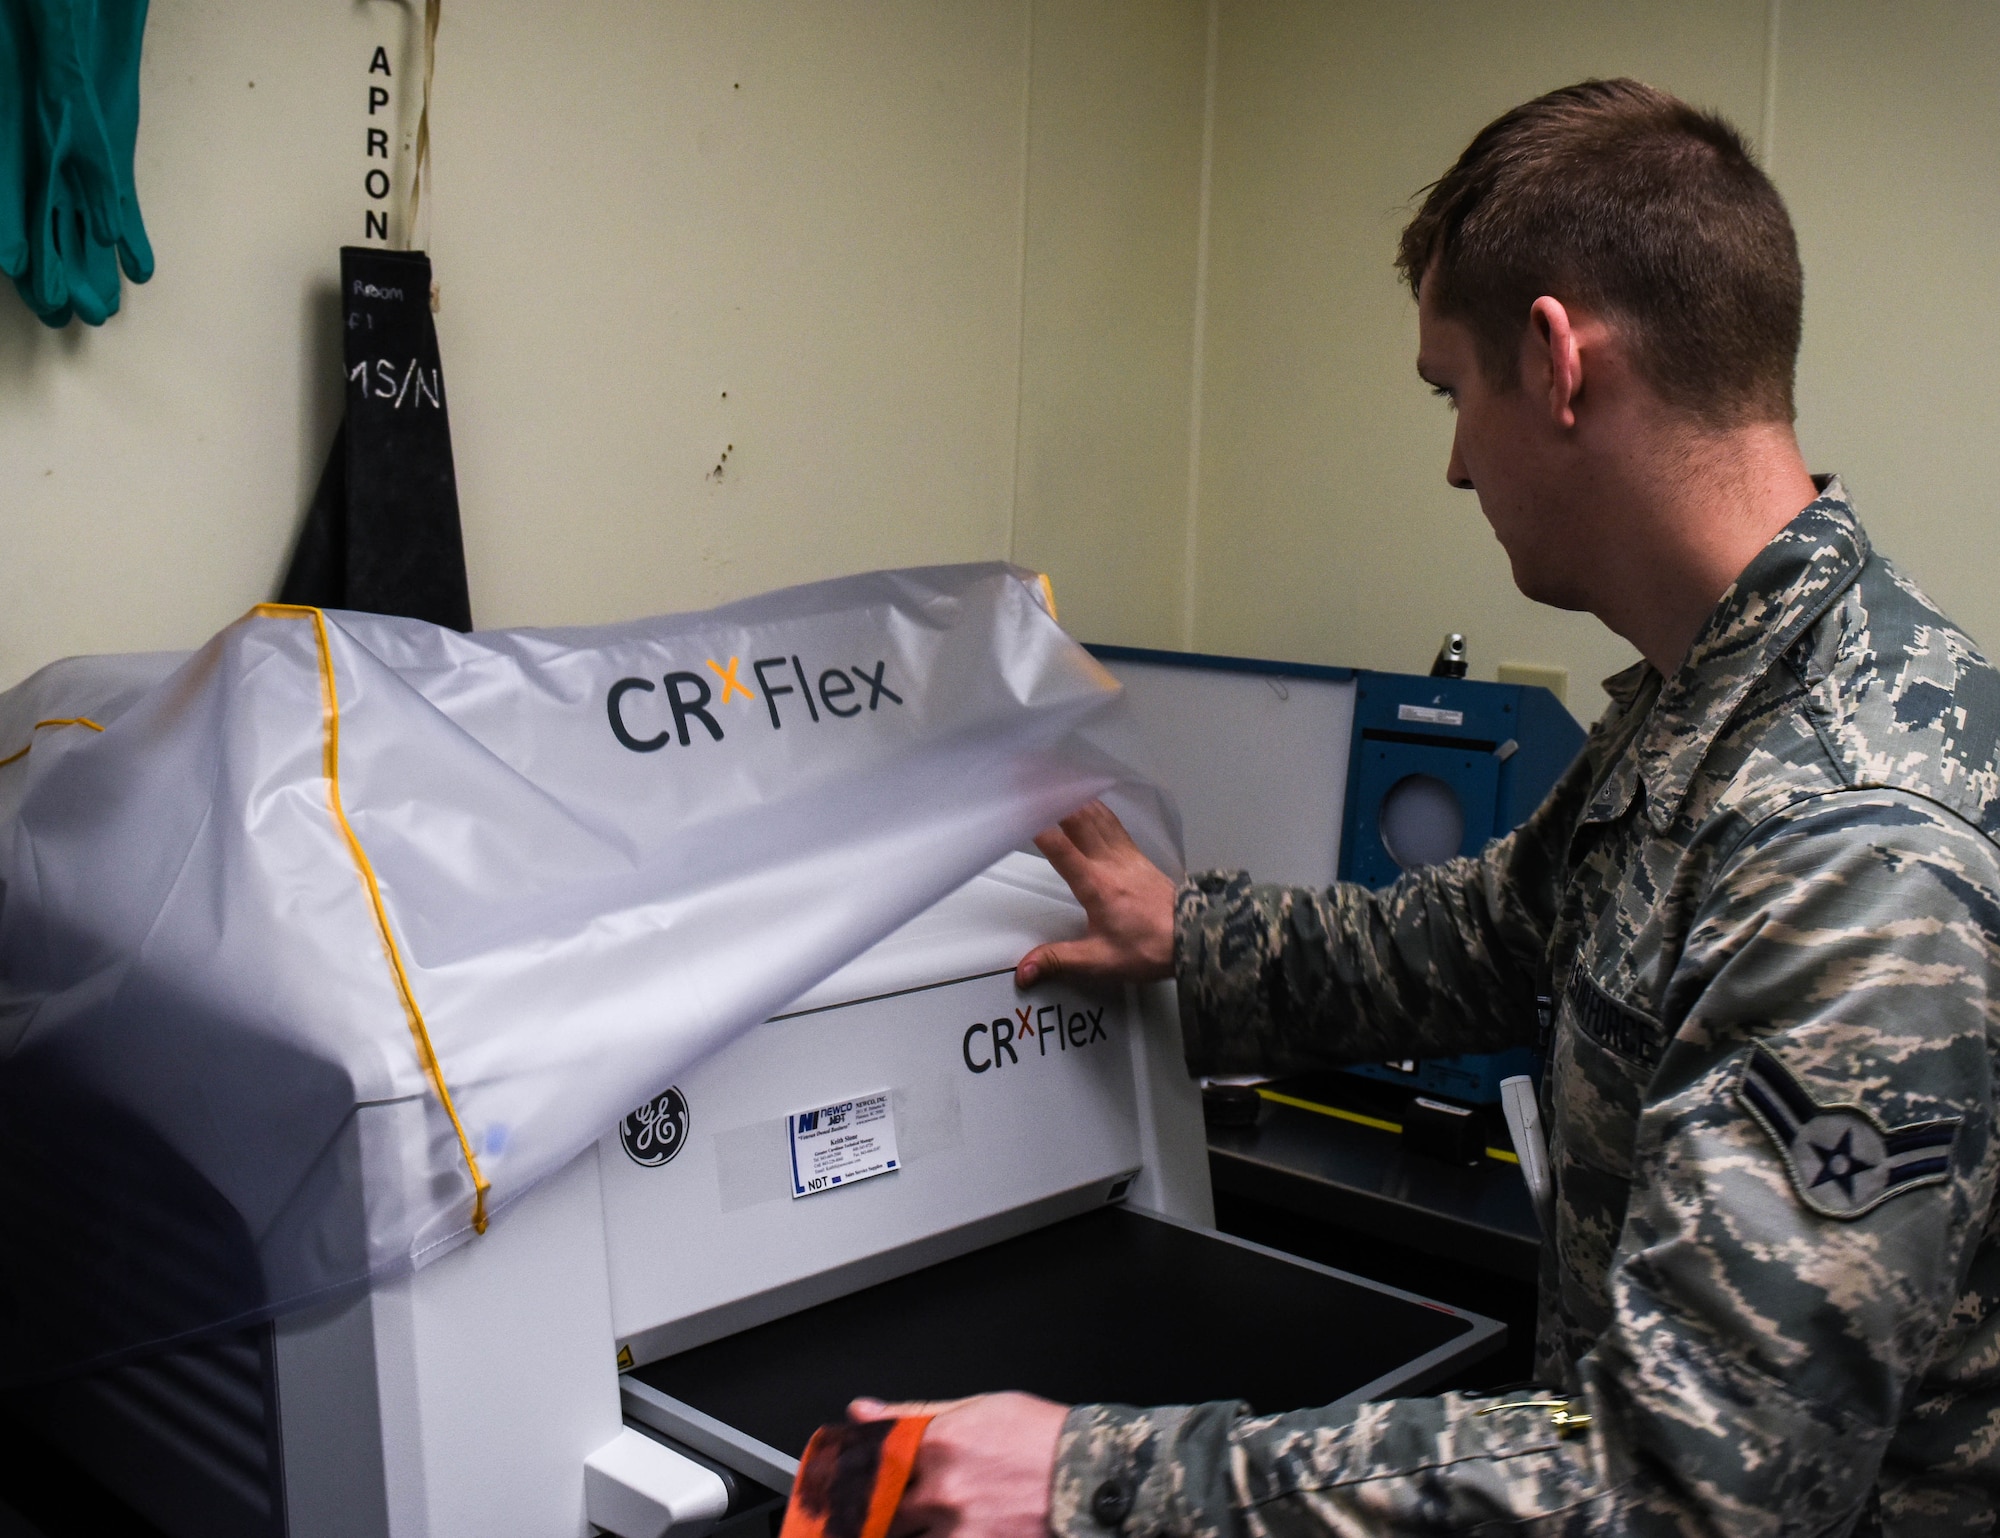 U.S. Air Force Airman 1st Class Tyler Chance, 20th Equipment Maintenance Squadron nondestructive inspection journeyman, uses a Computed Radiography (CR) Flex 2 machine at Shaw Air Force Base, S.C., April 25, 2018.